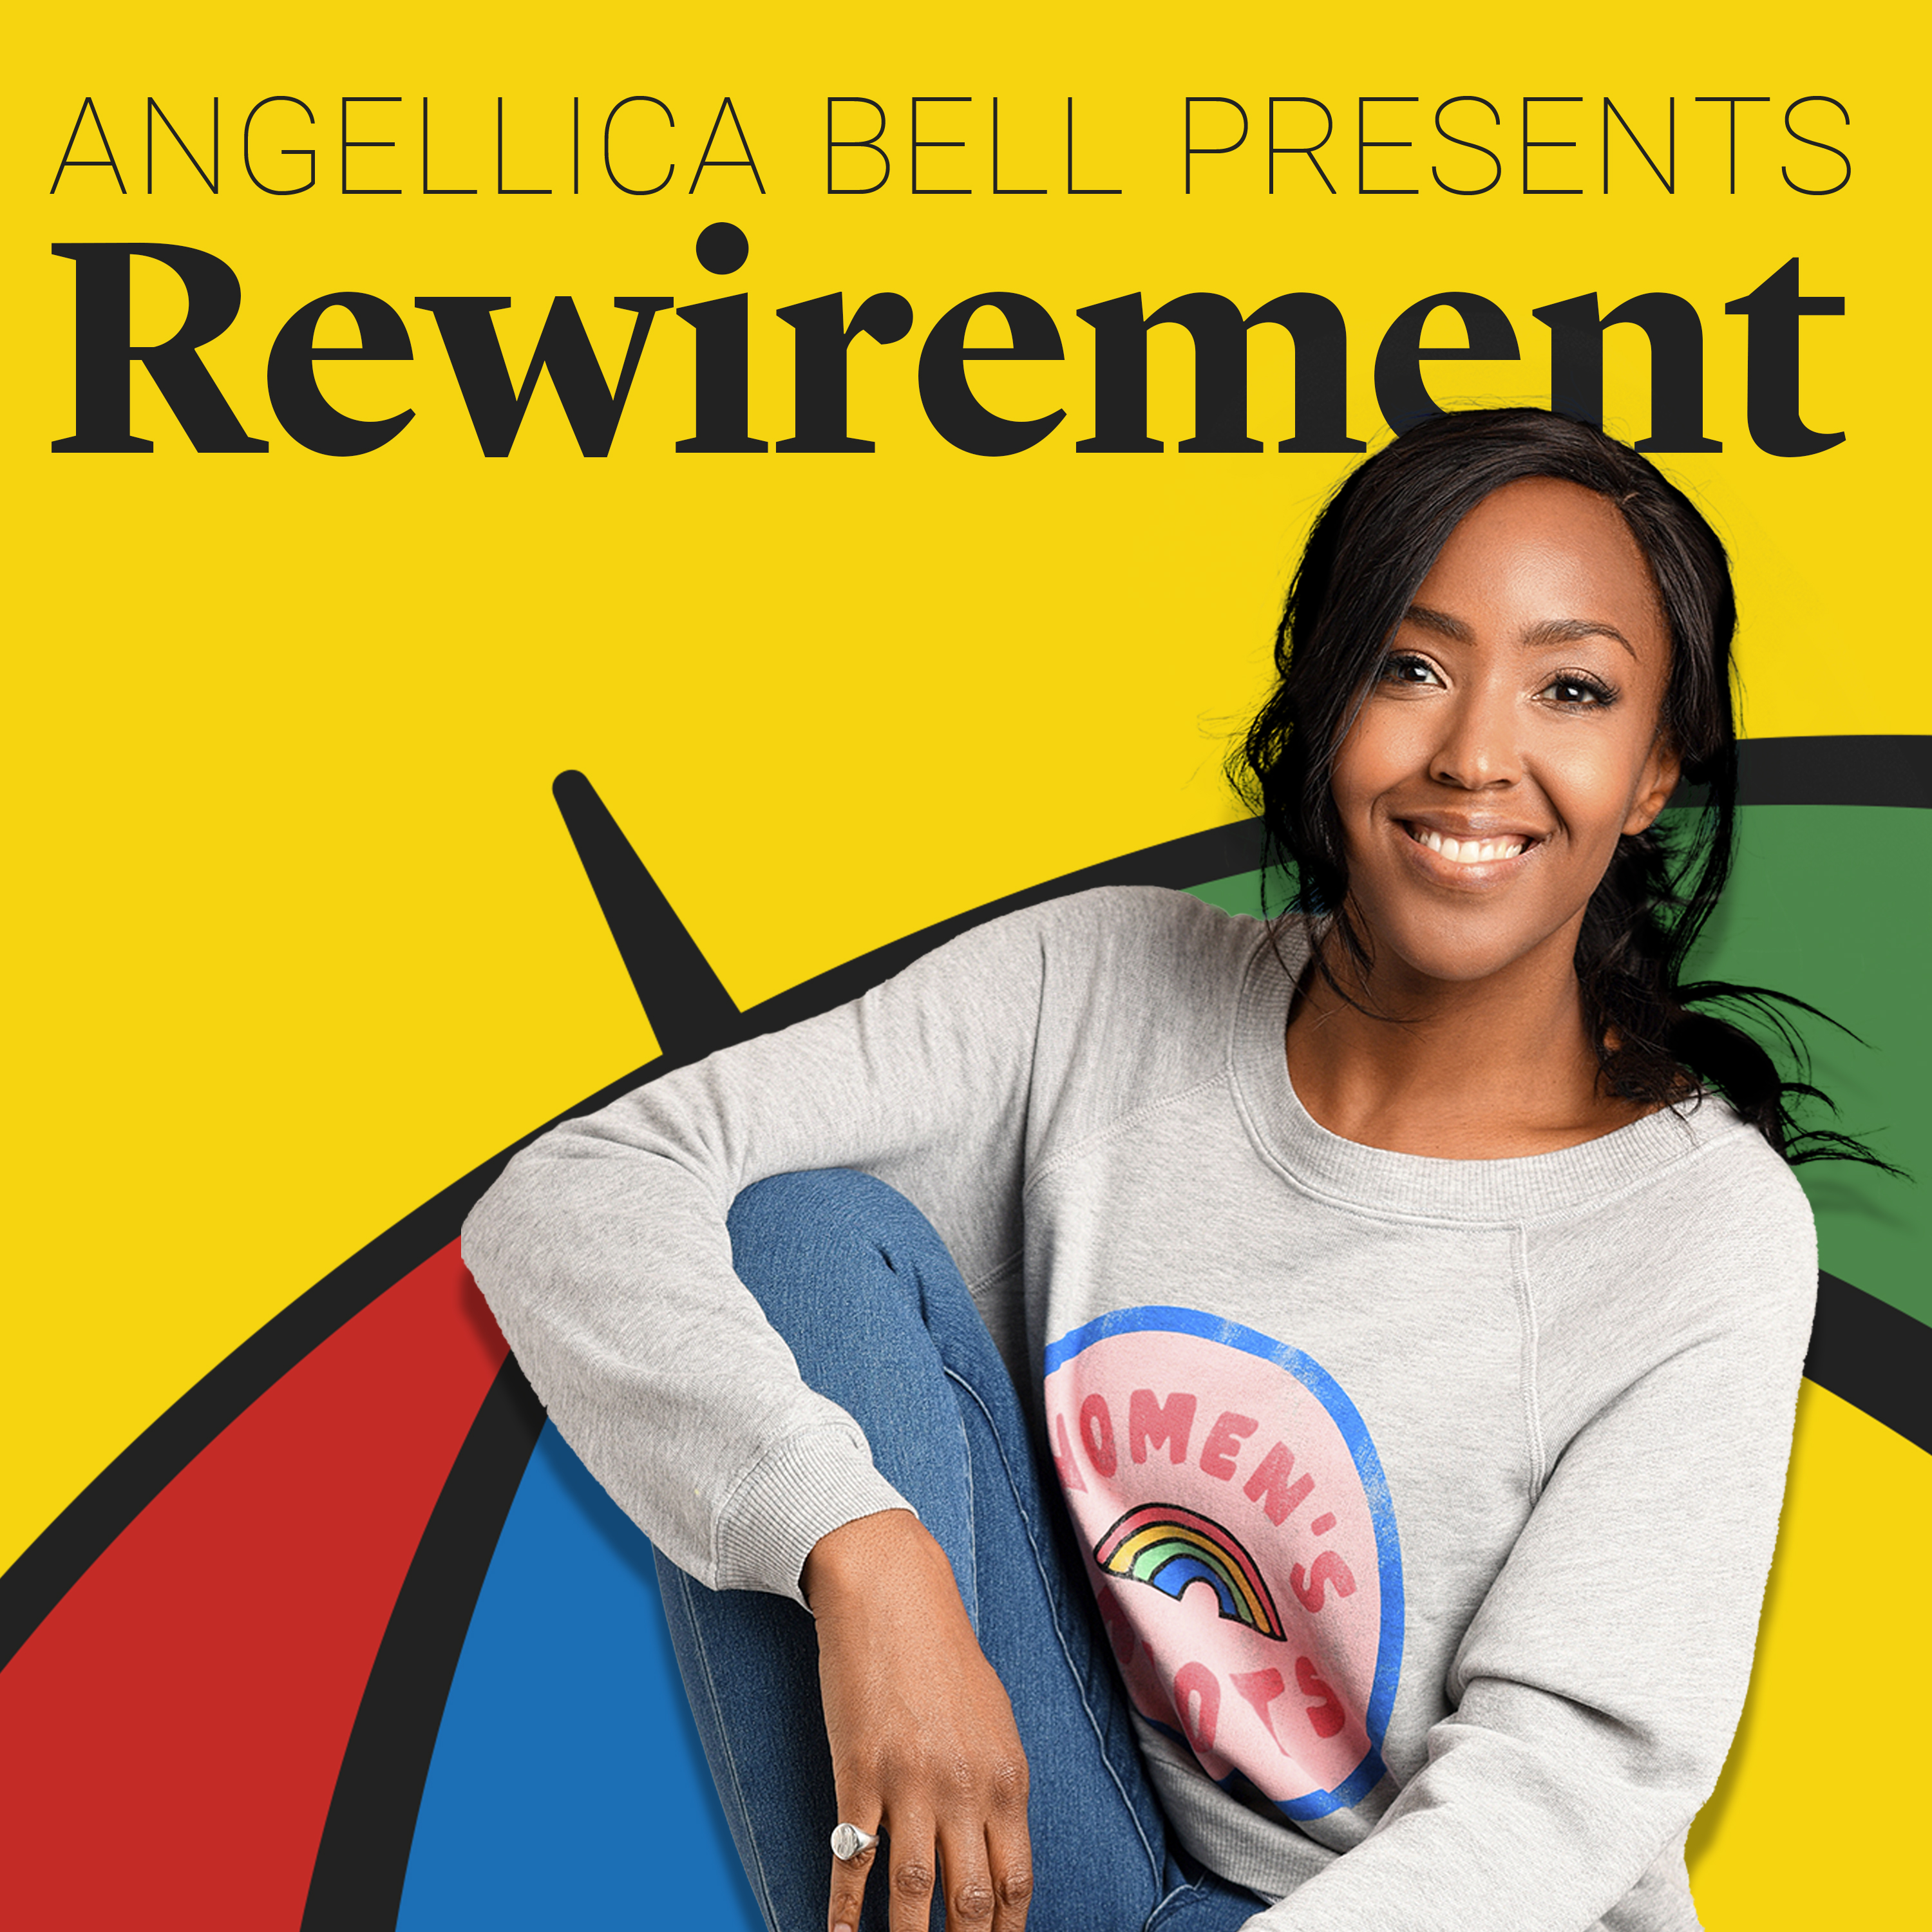 Angellica Bell presents Rewirement from Thursday 27th May